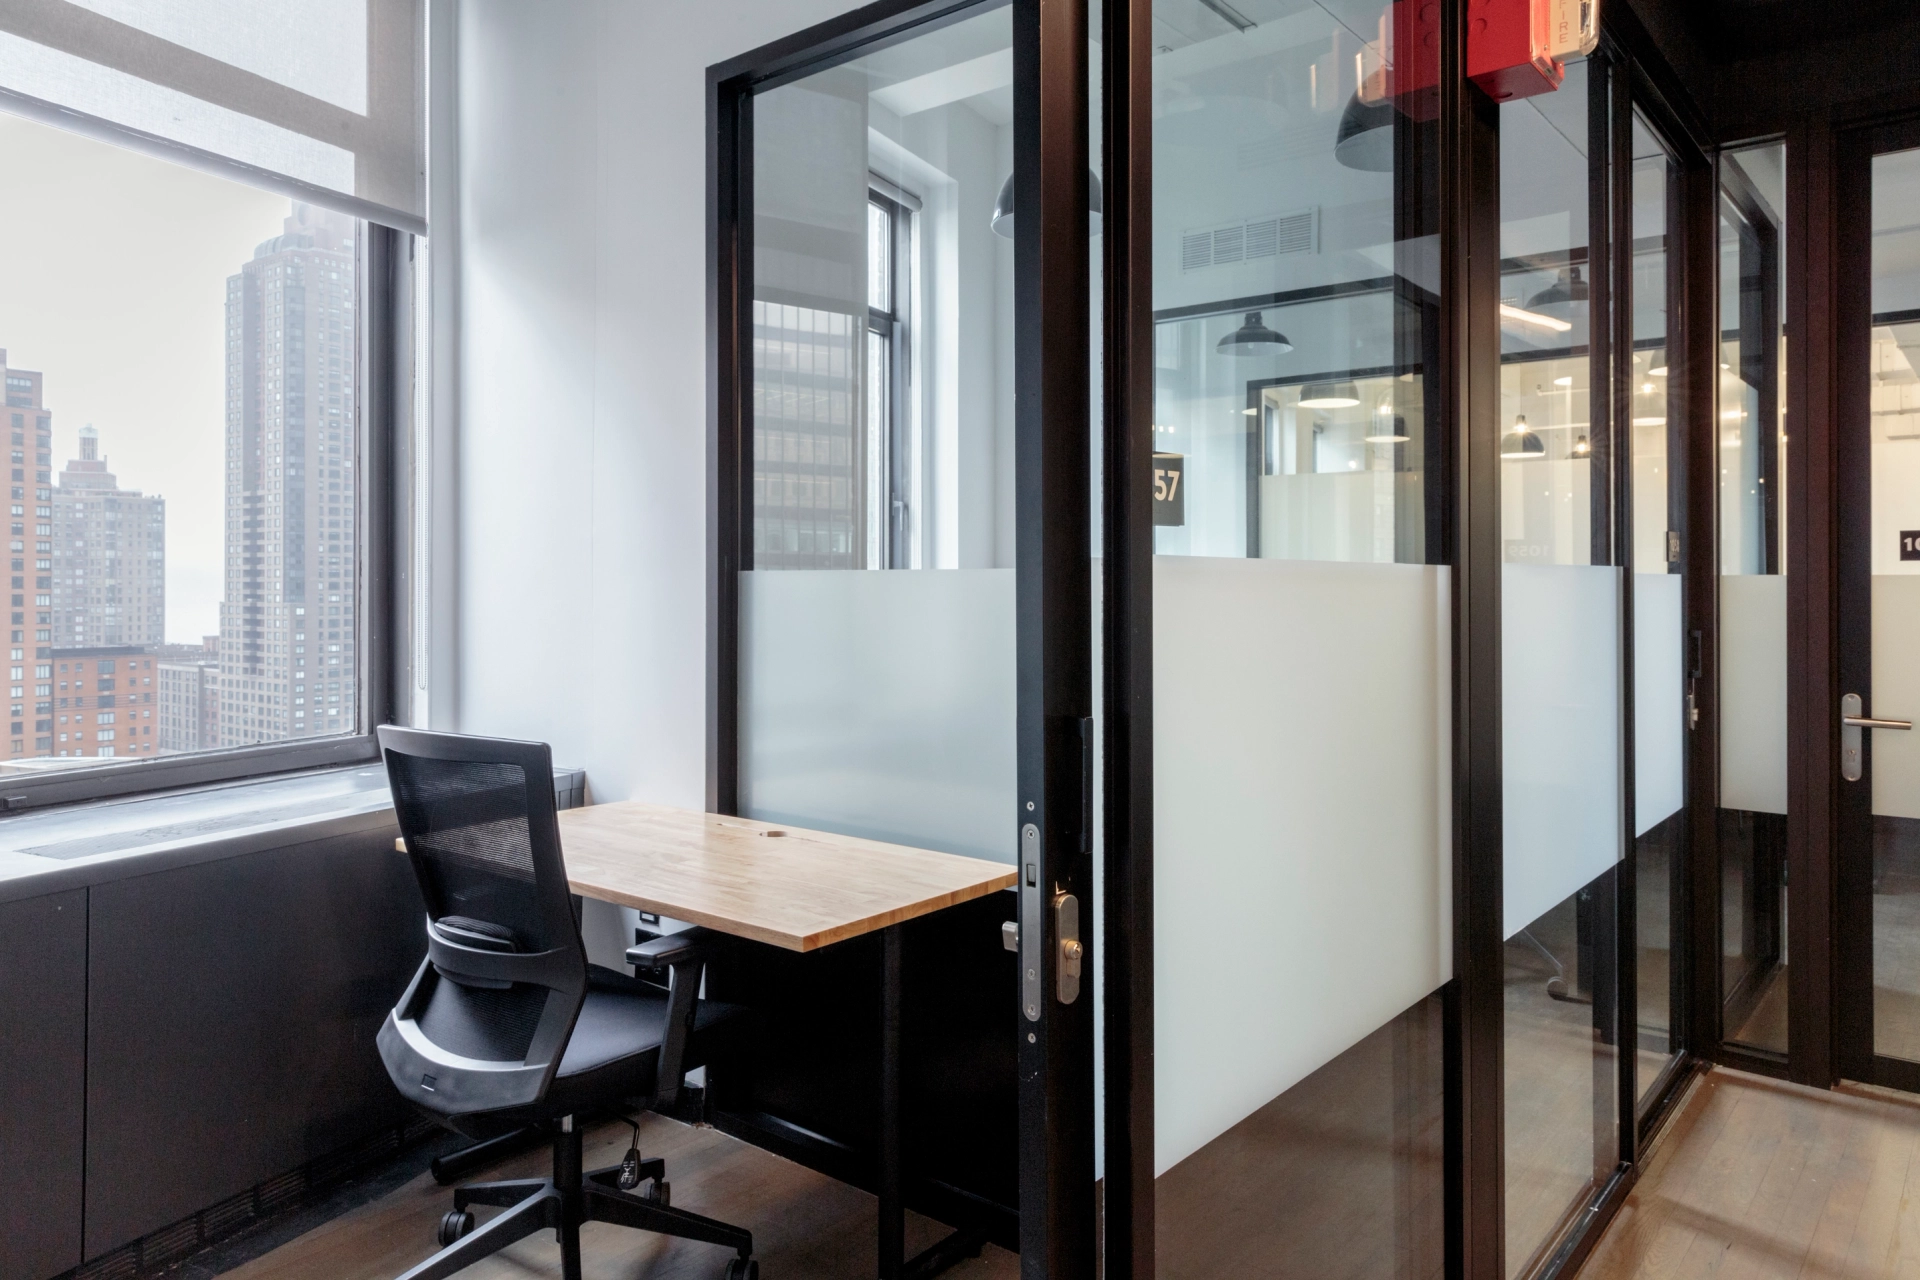 A New York workspace with glass walls and a desk.